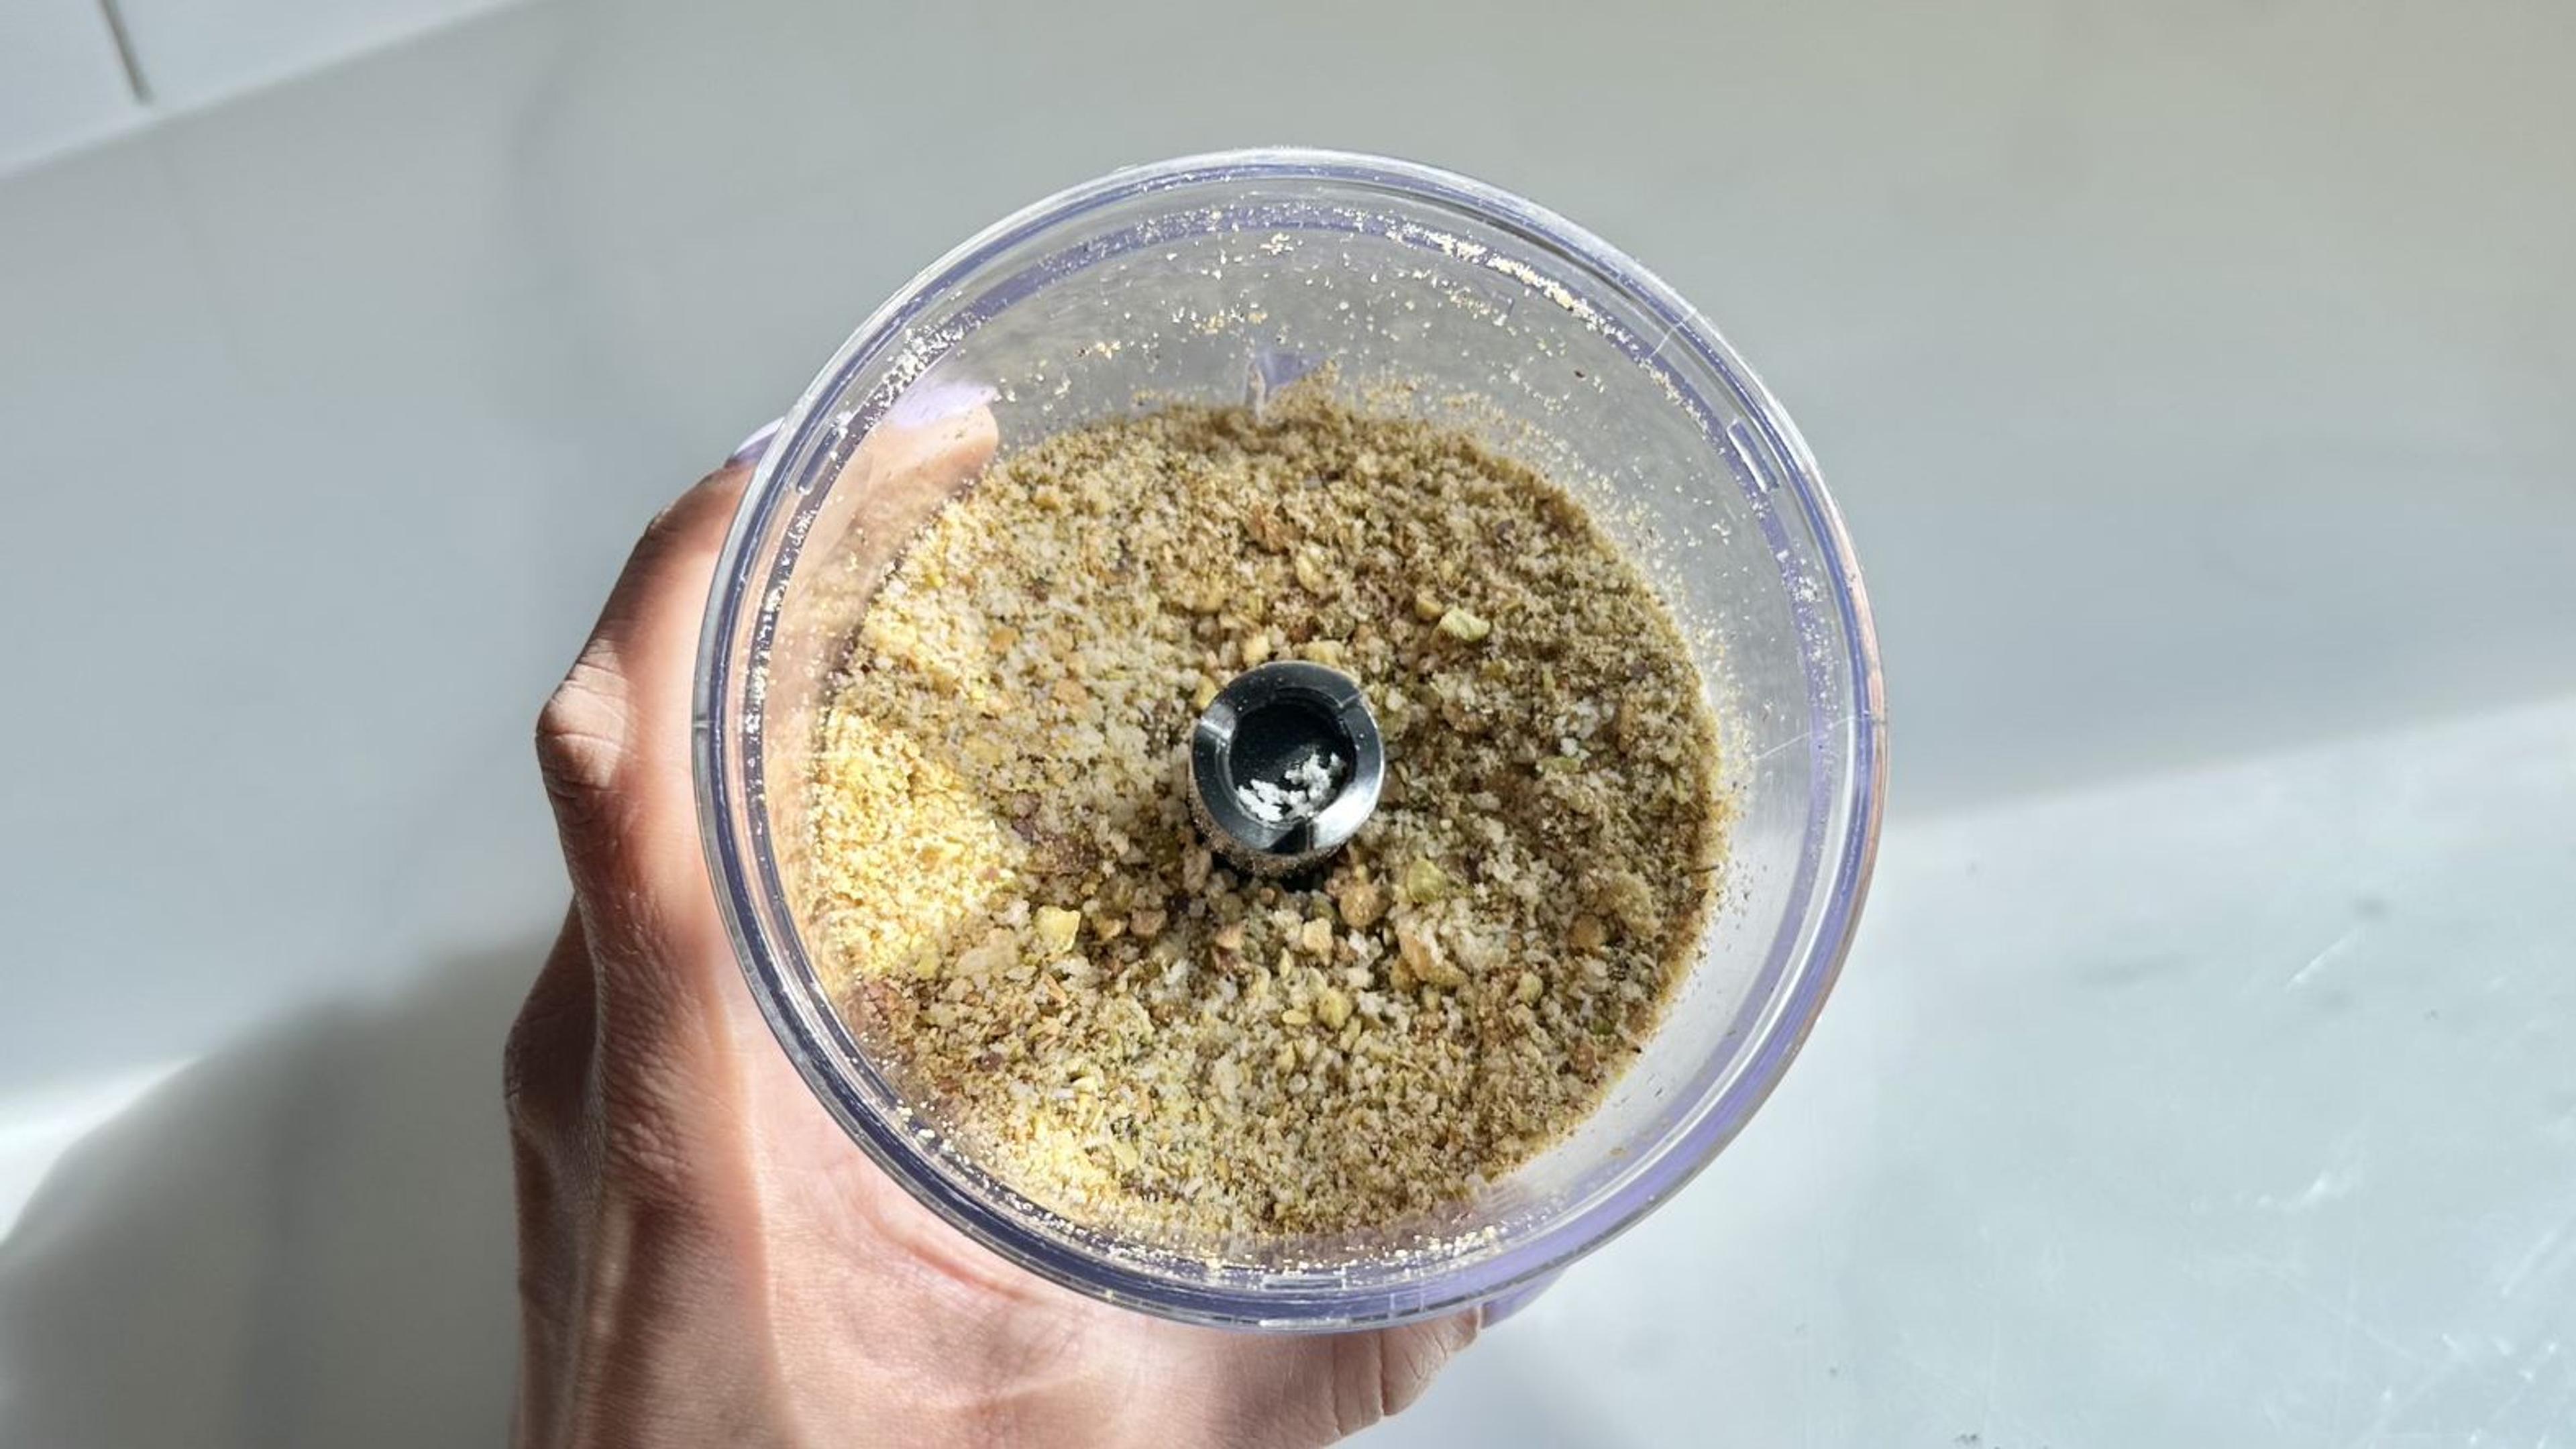 In a food processor, combine panko breadcrumbs, pistachios, and salt and pepper. If you do not have a food processor, finely chop the pistachios and combine with breadcrumbs.